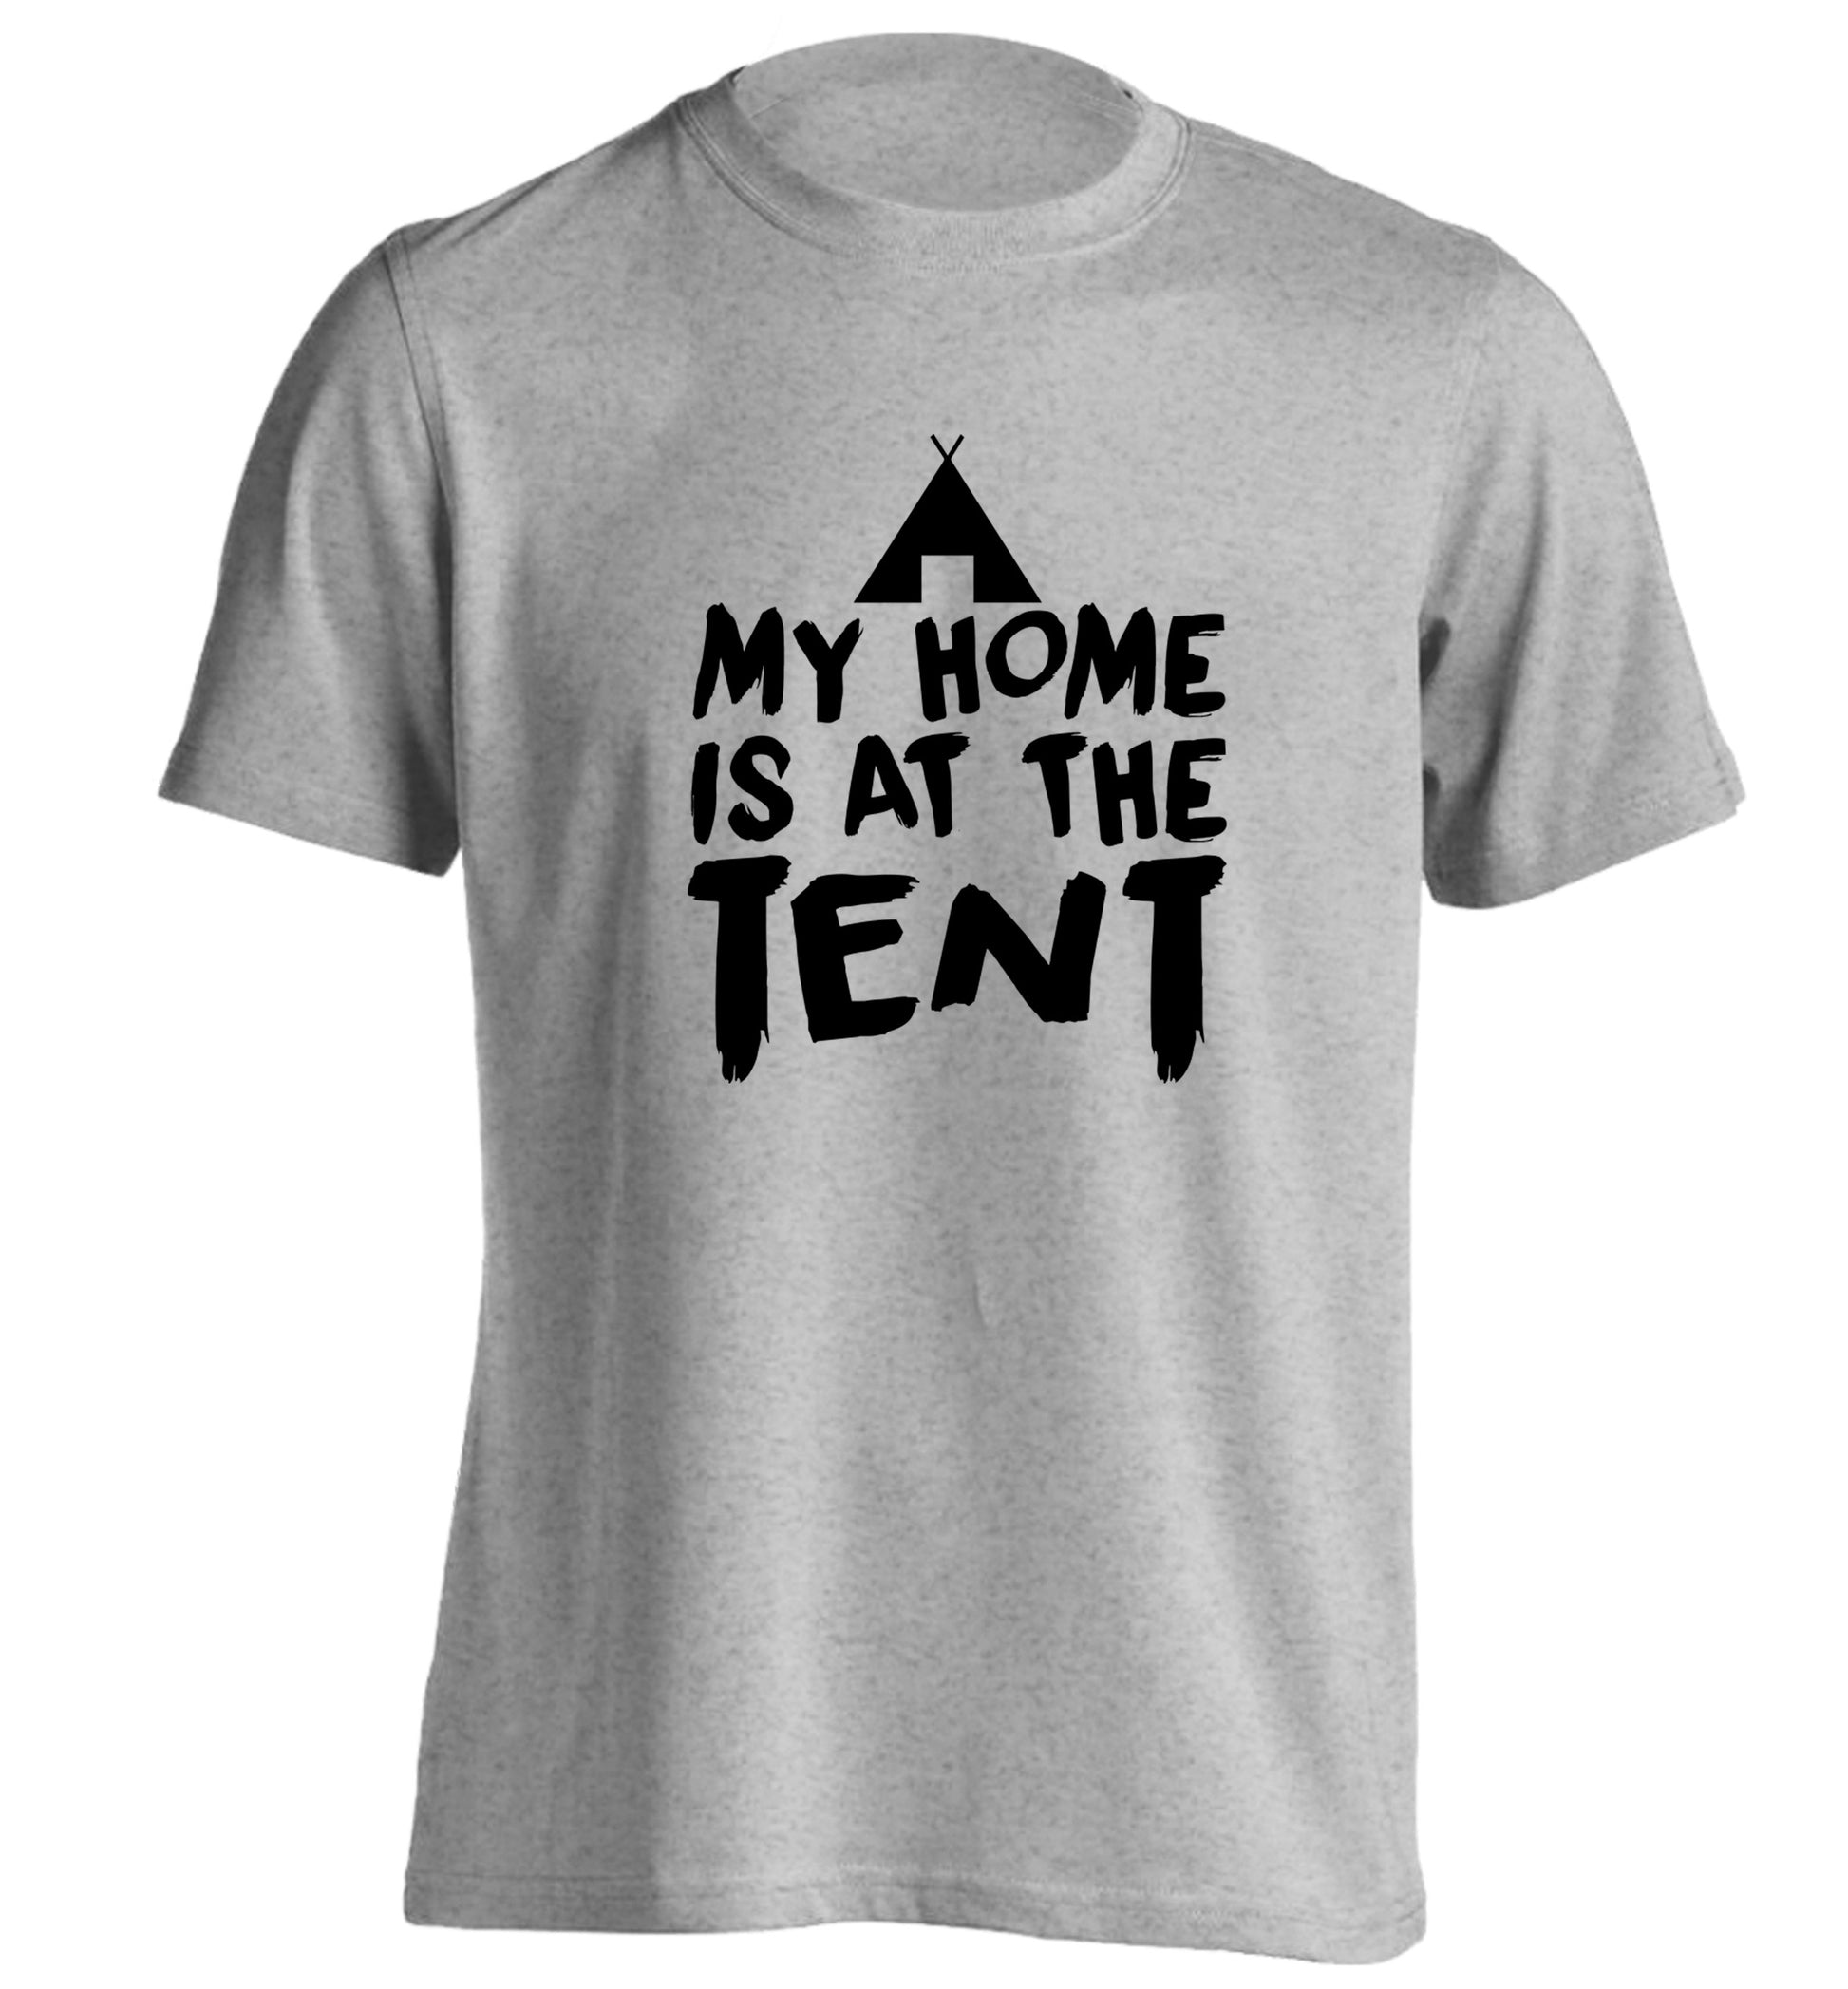 My home is at the tent adults unisex grey Tshirt 2XL